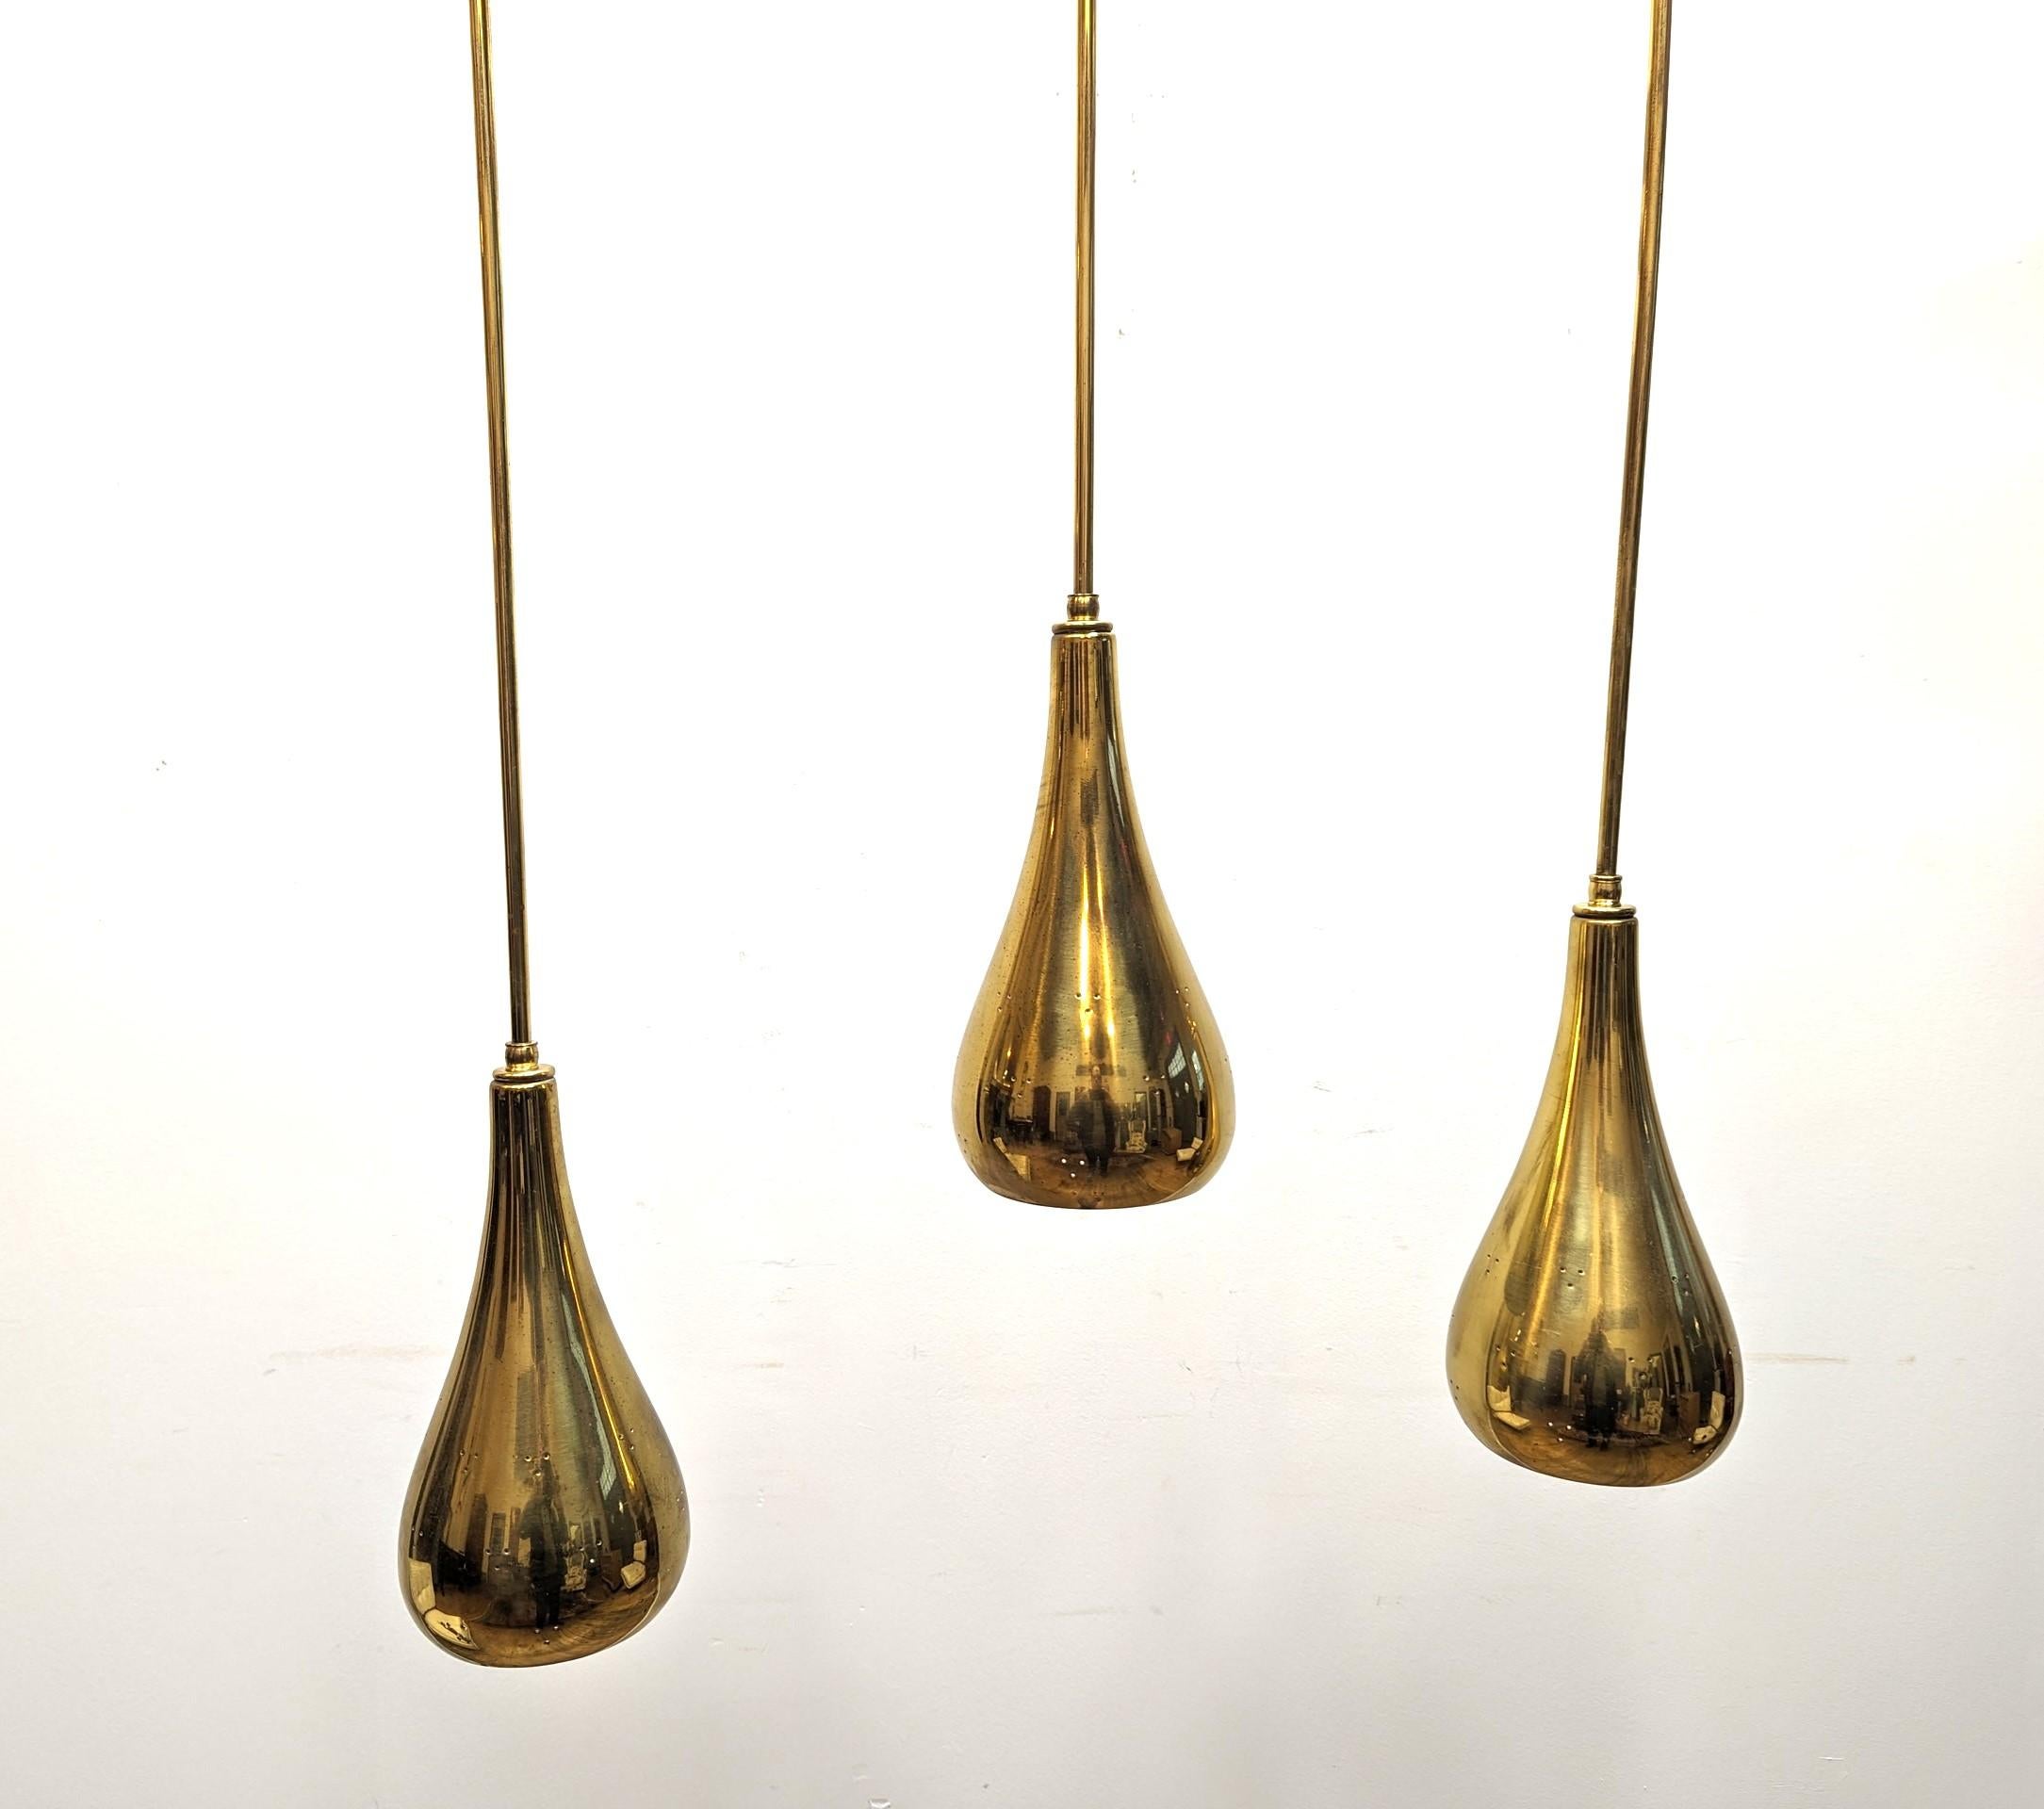 Sensational Brass Tear Drop Pendants attributed Paavo Tynell for Lightolier.  The Pendants are solid brass with a three hole triangular perforated pattern design detail.  The rounded shapes slightly turned in on the openings are finely sculpted.  